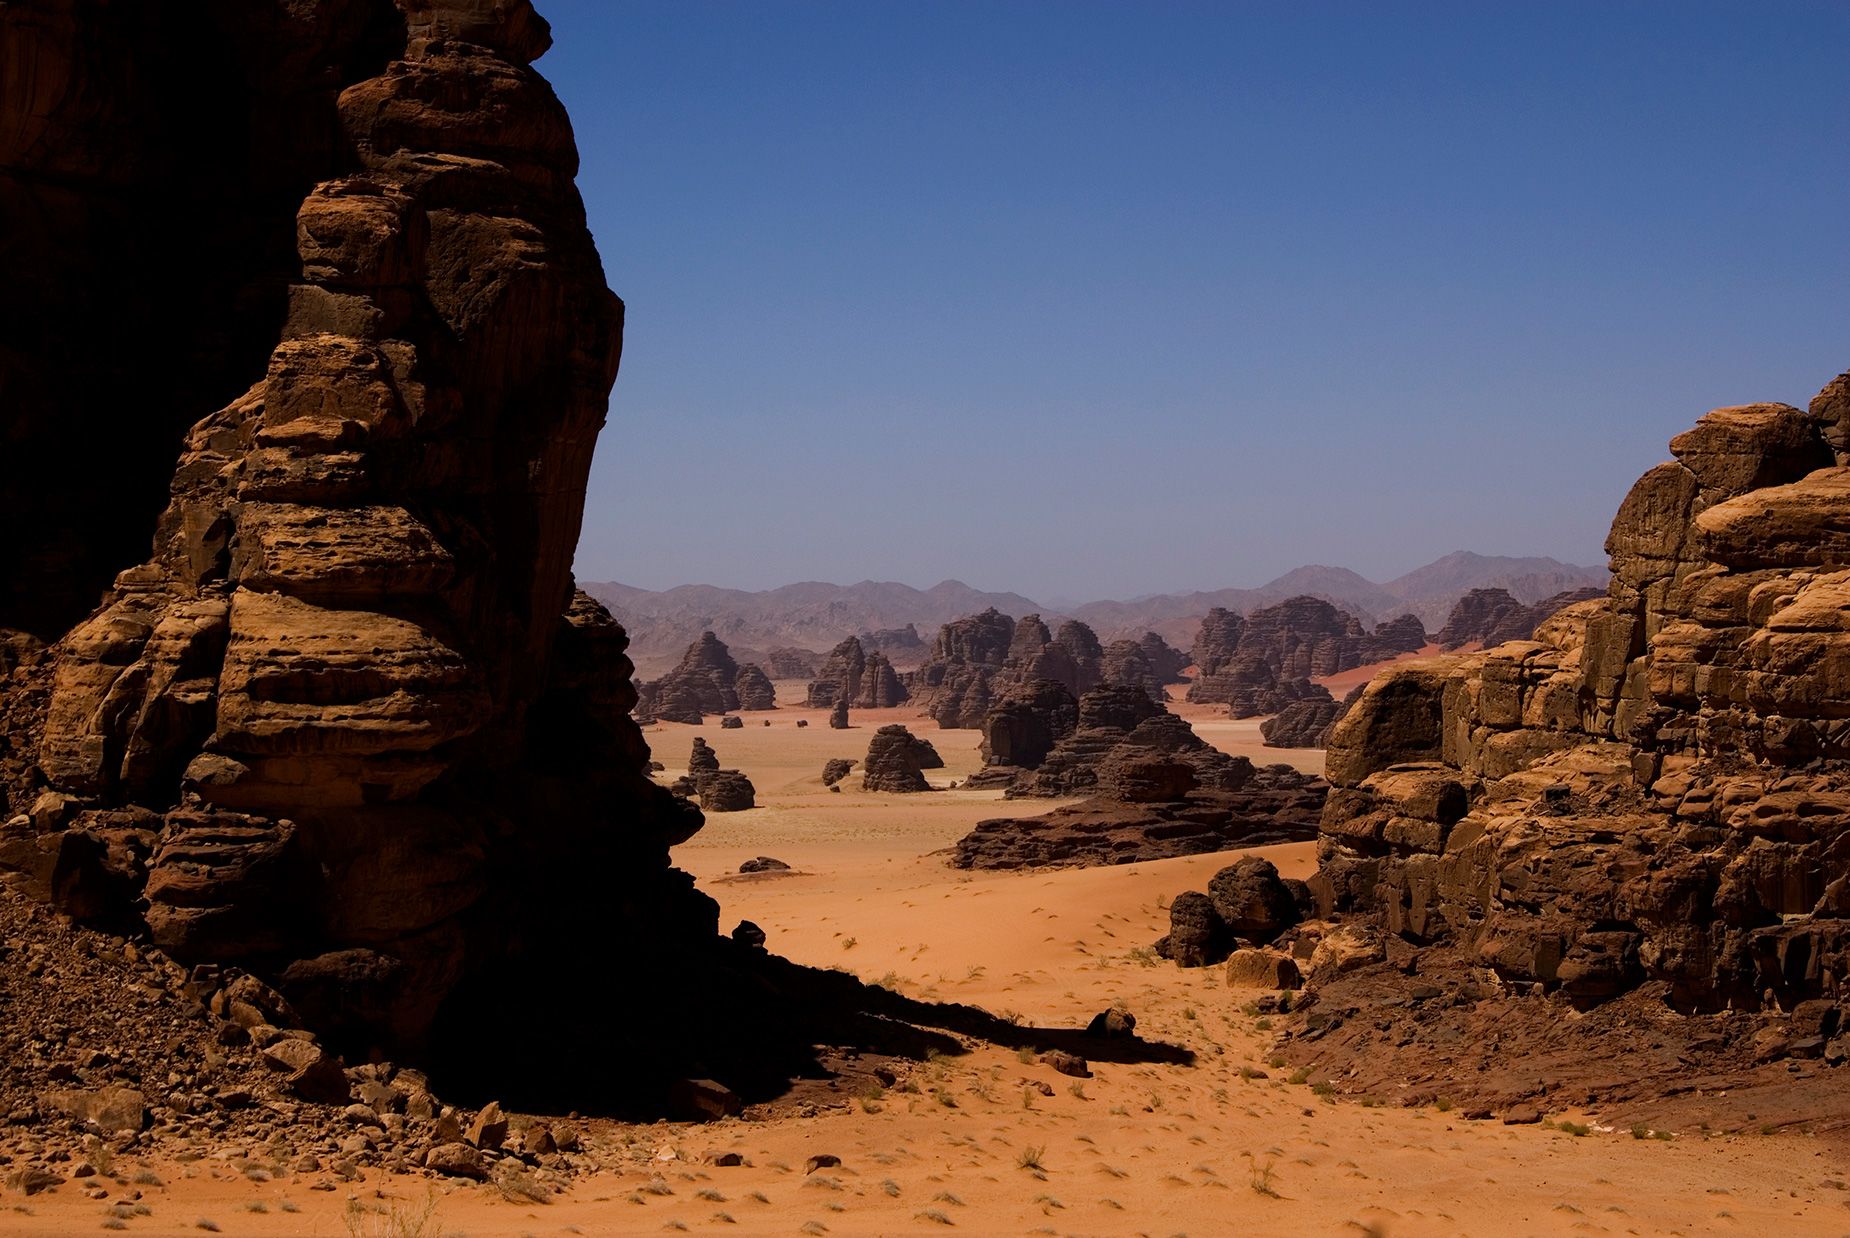 The huge Hisma desert, made up of red sand and huge sandstone rock formations, stretches up into Jordan.